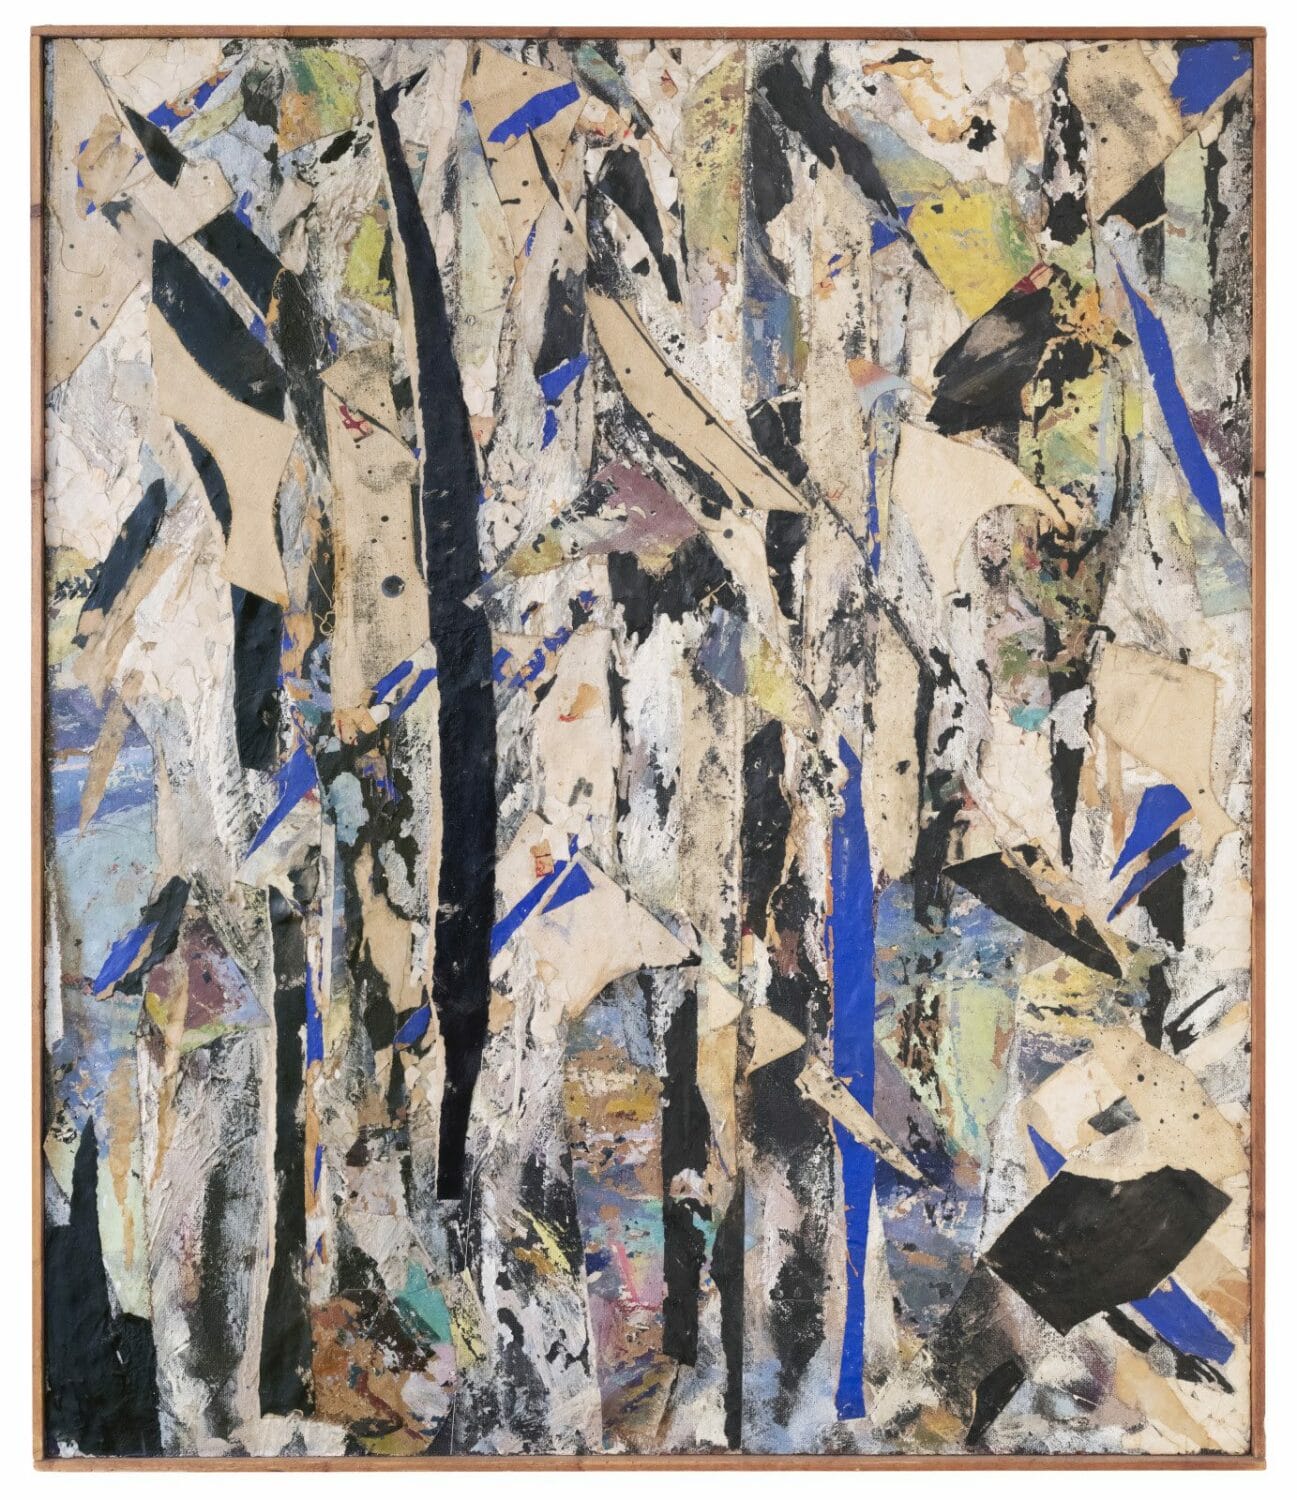 Lee Krasner, Untitled, 1954, oil, glue, canvas and paper collage on Masonite, 48 x 40 inches, 122 x 102 cm. © 2021 Pollock-Krasner Foundation / Artists Rights Society (ARS), New York. Private Collection, New York City.